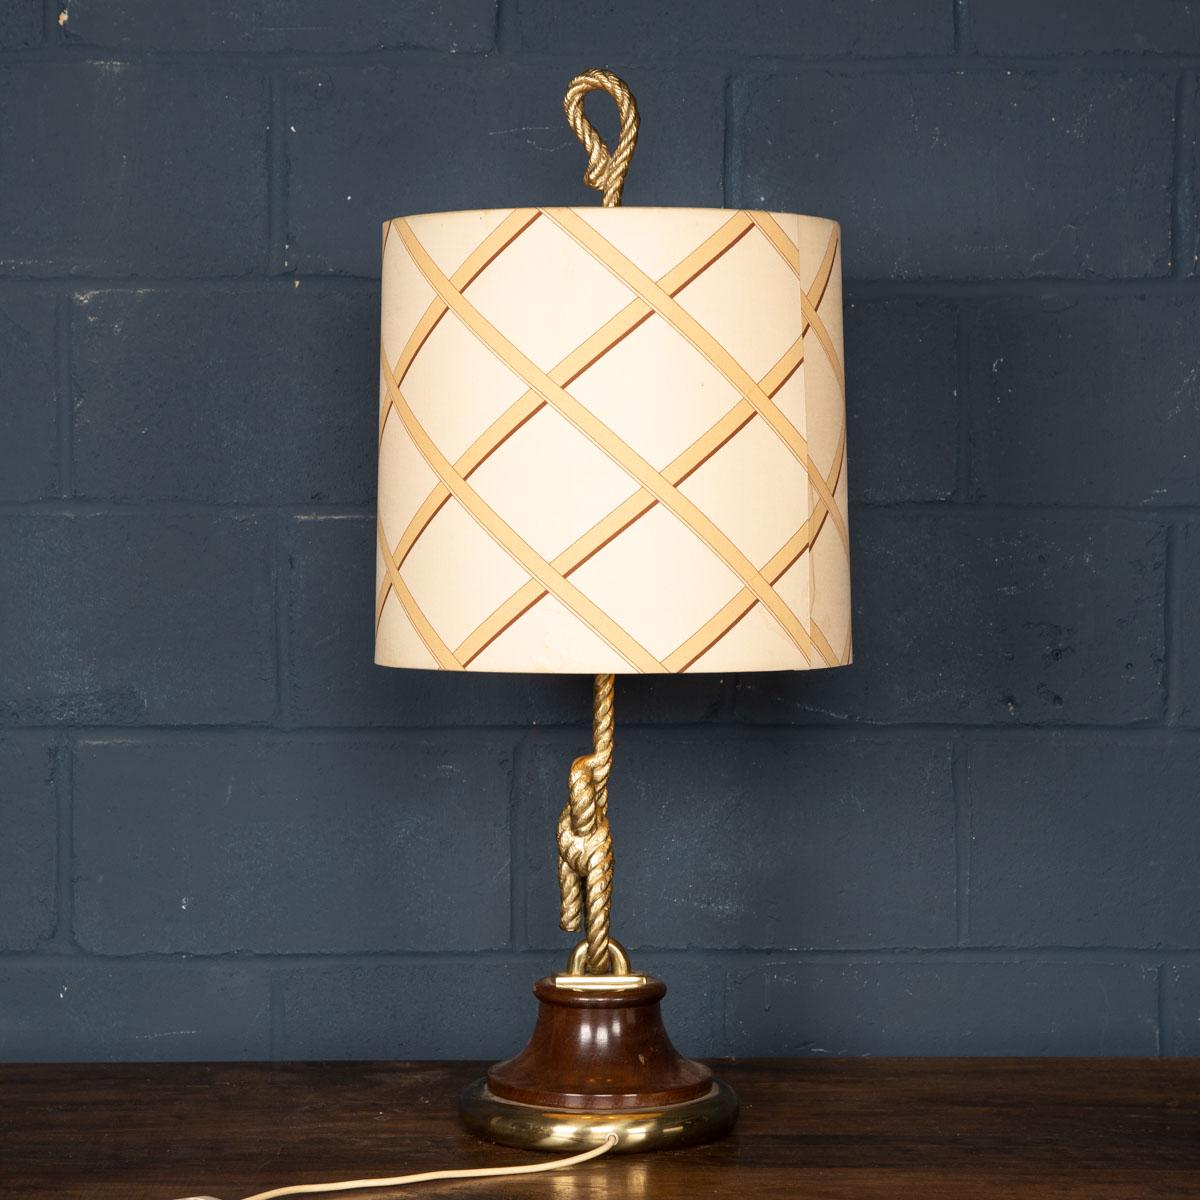 Unknown 20th Century Large Table Lamp with Original Shade Attributable to Gucci, c.1980 For Sale